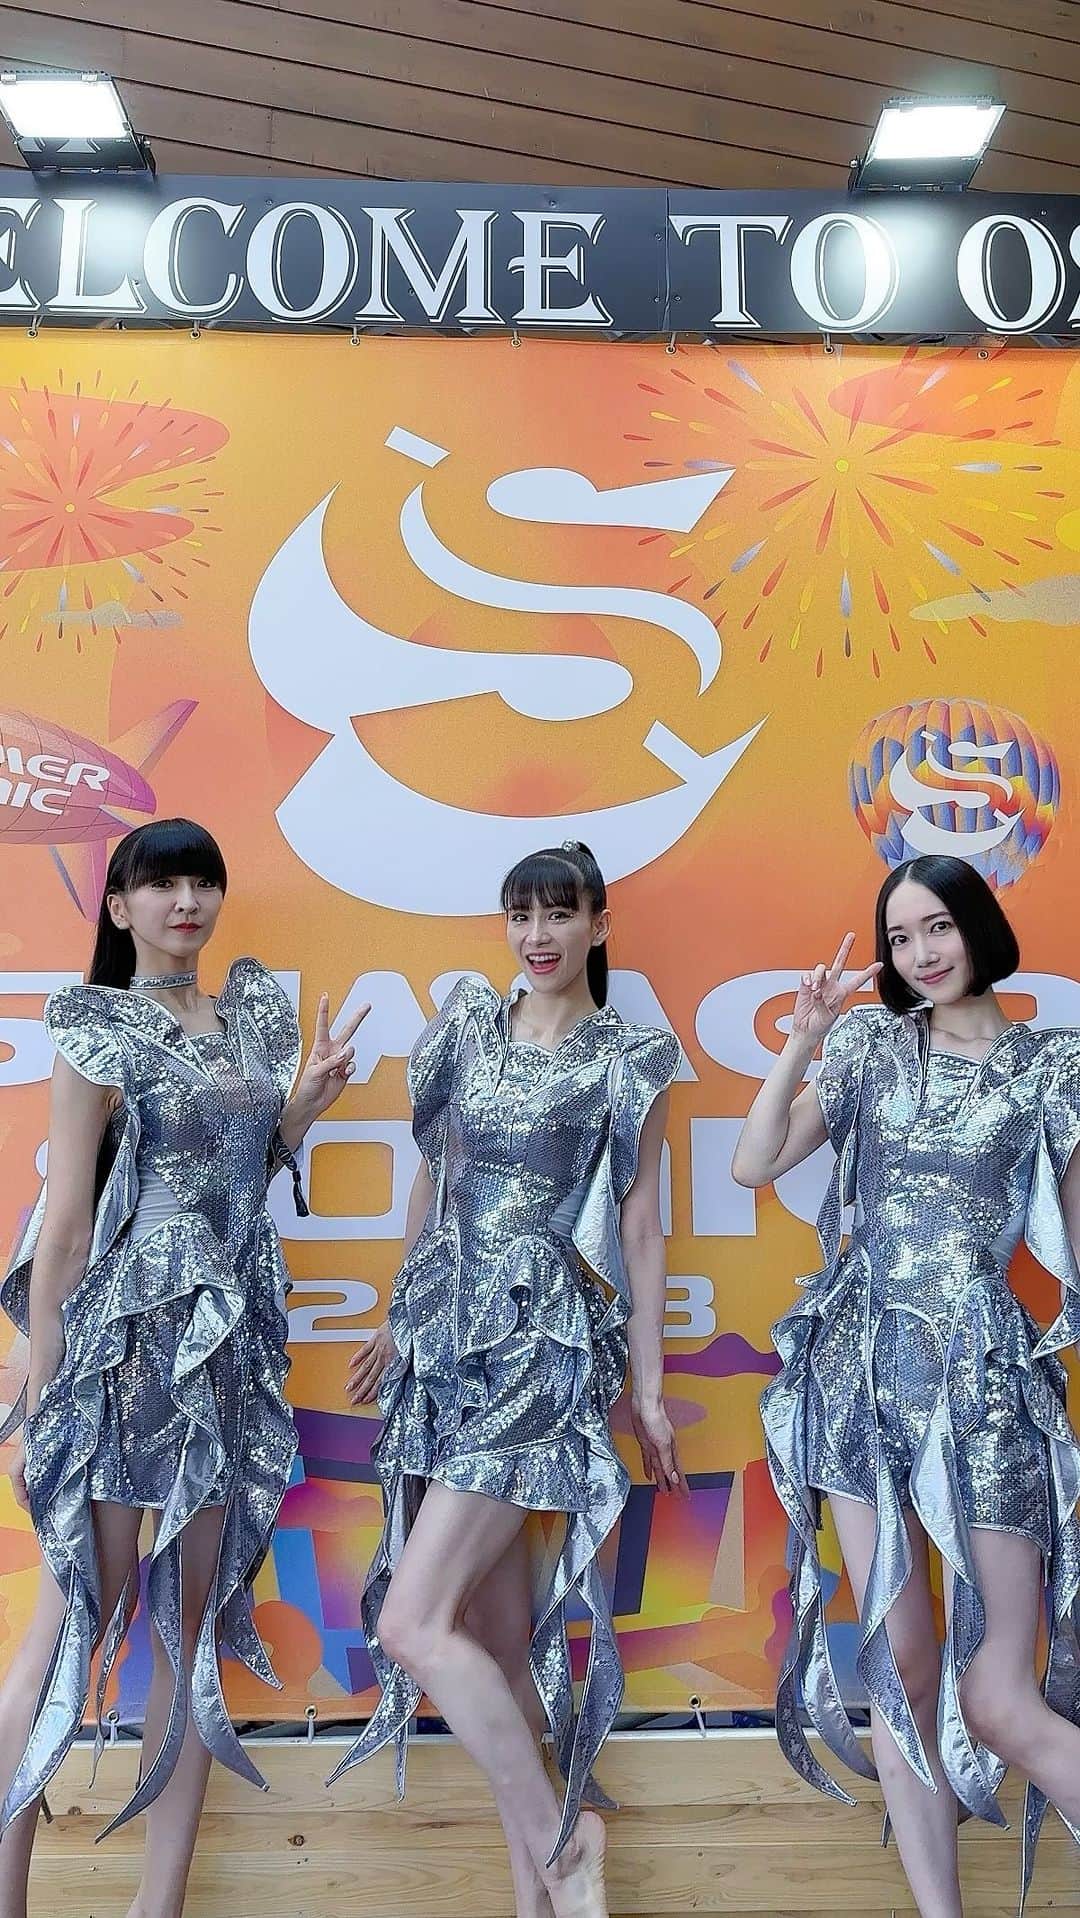 Perfumeのインスタグラム：「「SUMMER SONIC」ありがとうございました！  久しぶりの野外でのライブで 夏を感じて爆上がりのメンバーでした☀️  今夜、"Moon"情報の解禁があるかも…?!🌕 お楽しみに！！  Perfume最新曲「Moon」配信はストーリーから🌈  Thank you SUNMERSONIC OSAKA! Performing outside in this heat is no joke but had so much fun with all of you🔥  Stay tuned for the updated “Moon” info coming out tonight!  #prfm」